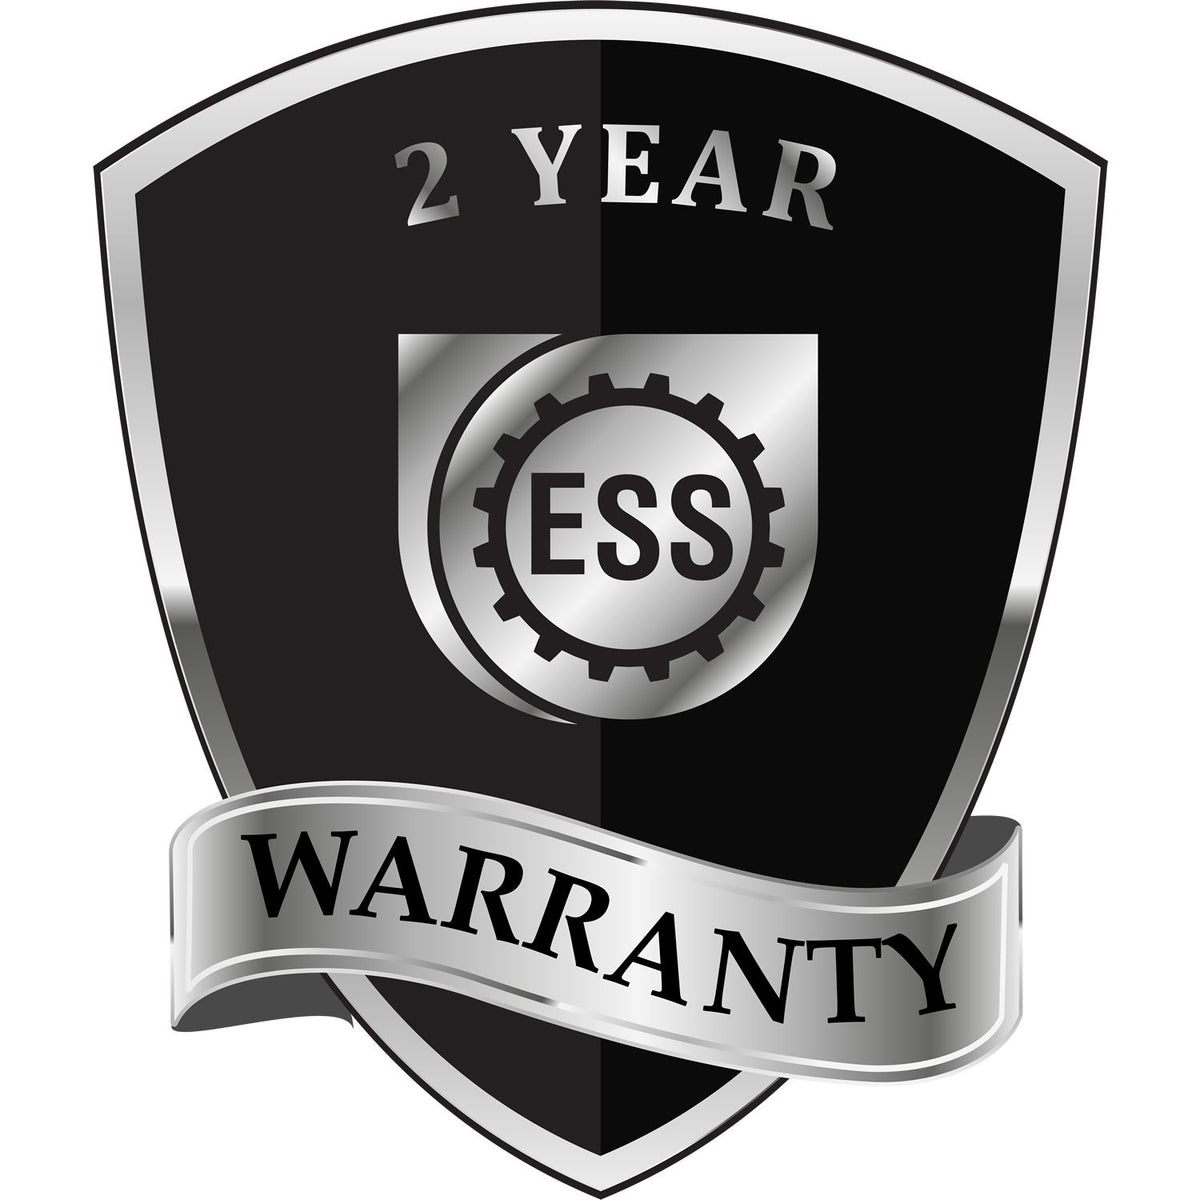 A badge or emblem showing a warranty icon for the State of Illinois Extended Long Reach Engineer Seal